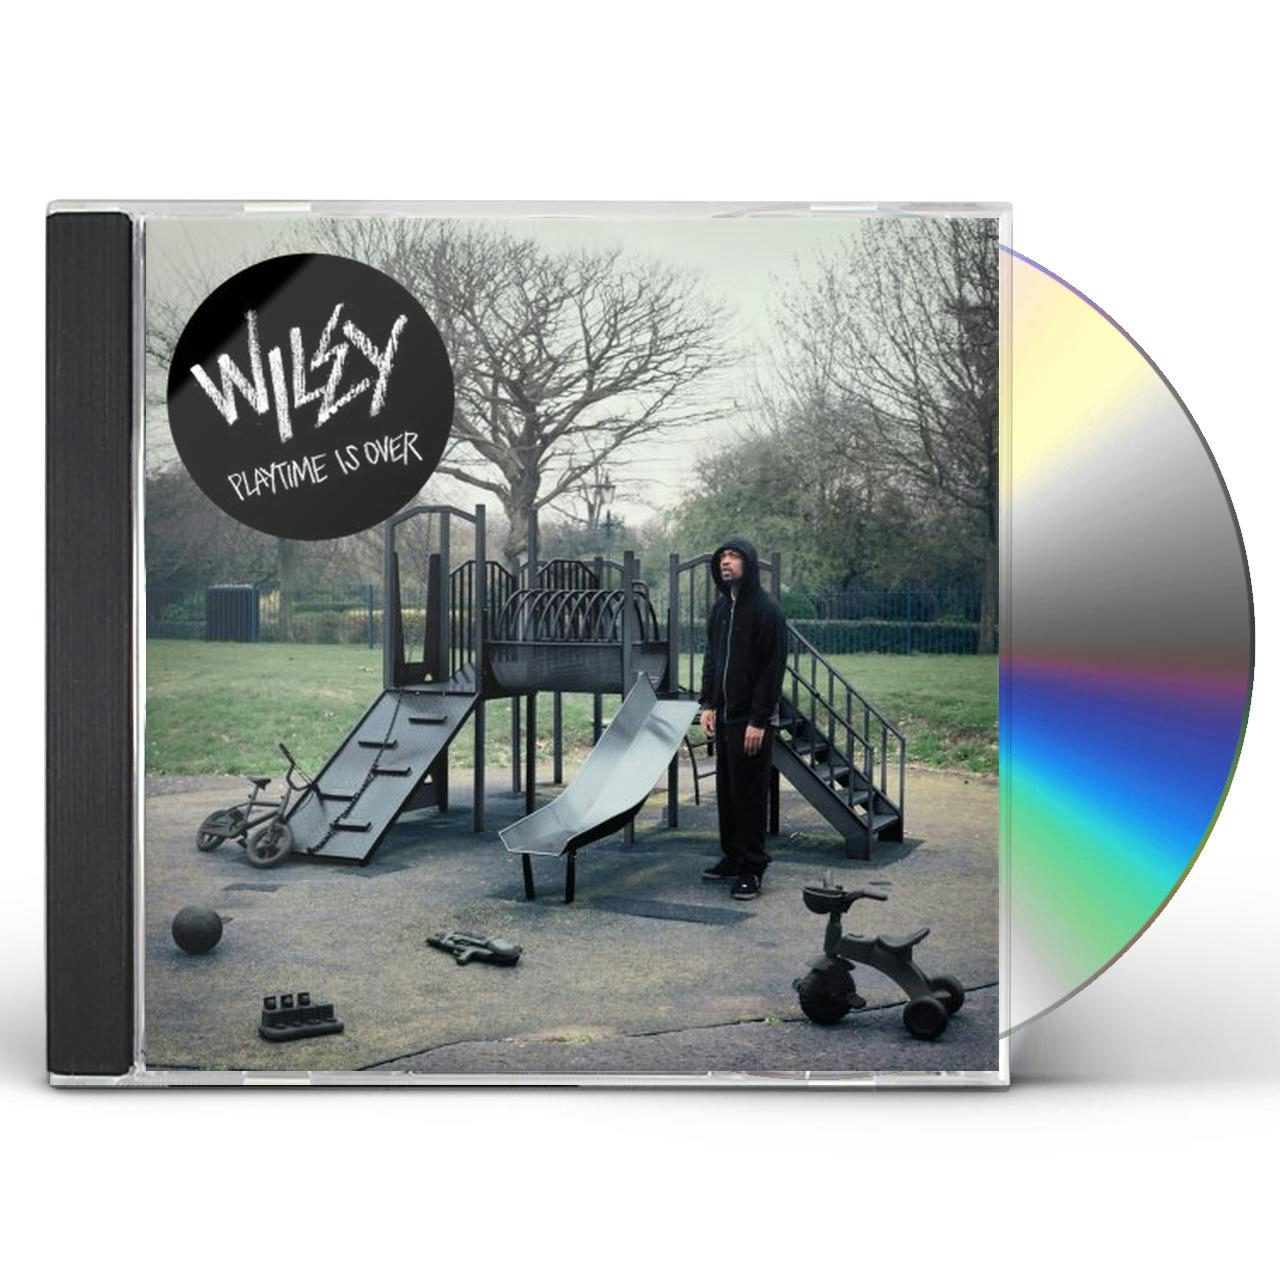 Wiley PLAYTIME IS OVER CD